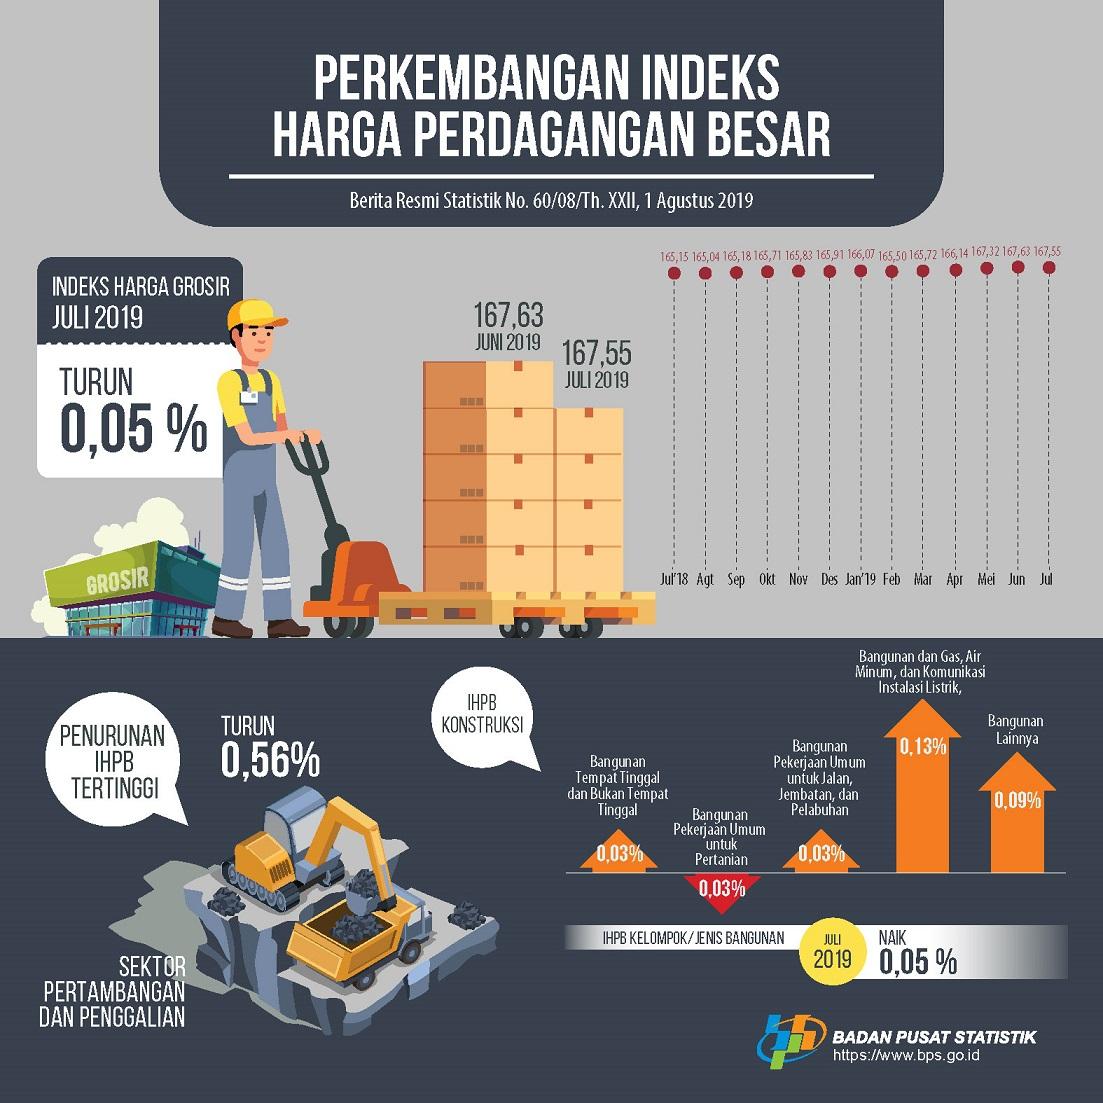 July 2019, General Wholesale Prices Index Non-Oil and Gas decreased 0.05%